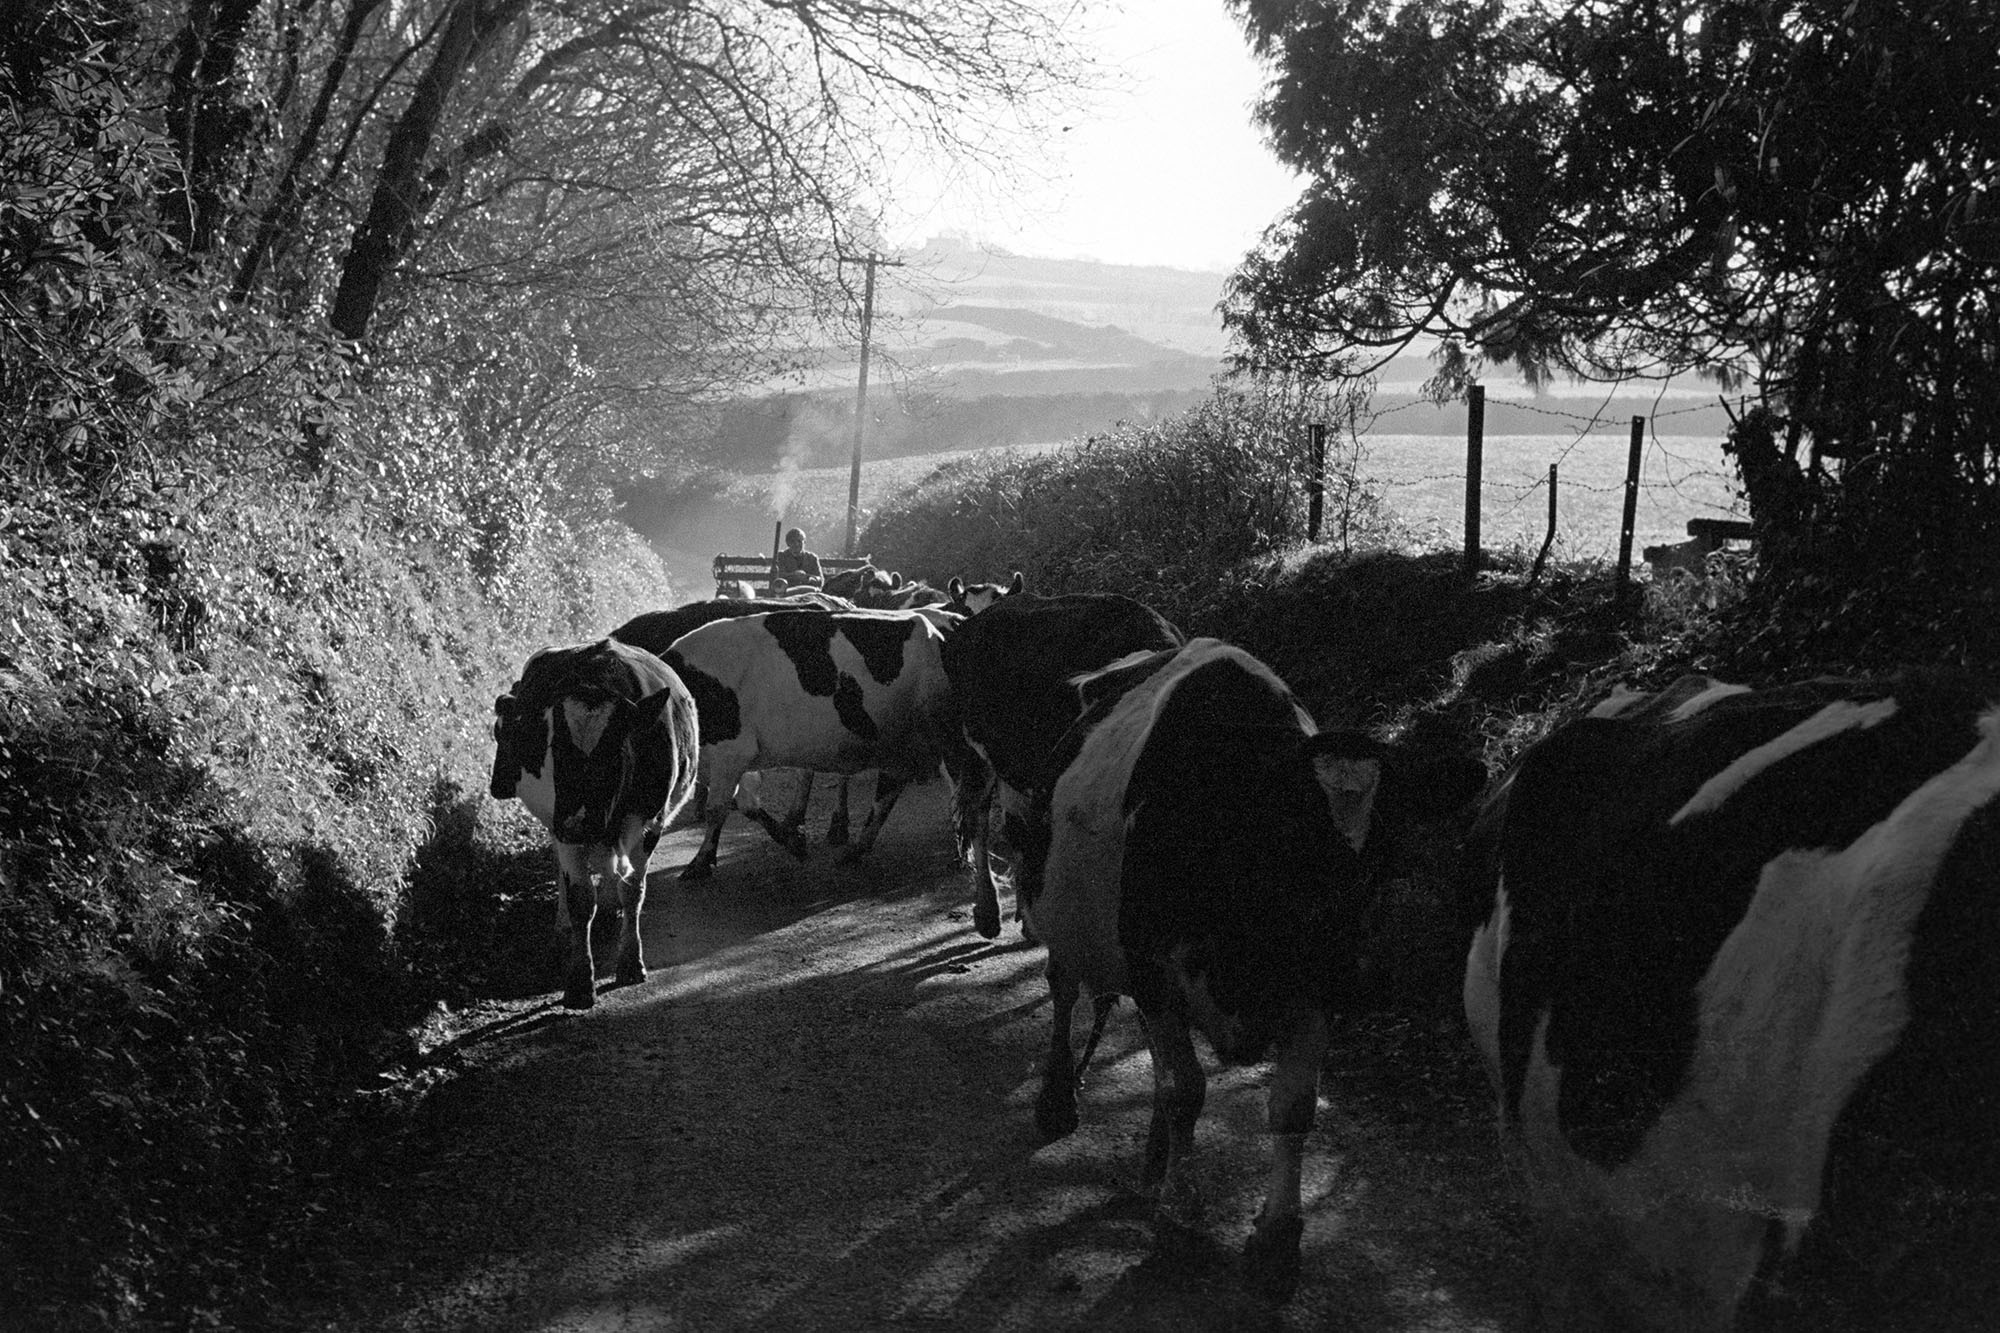 Frank Pickard taking cows to be milked by James Ravilious